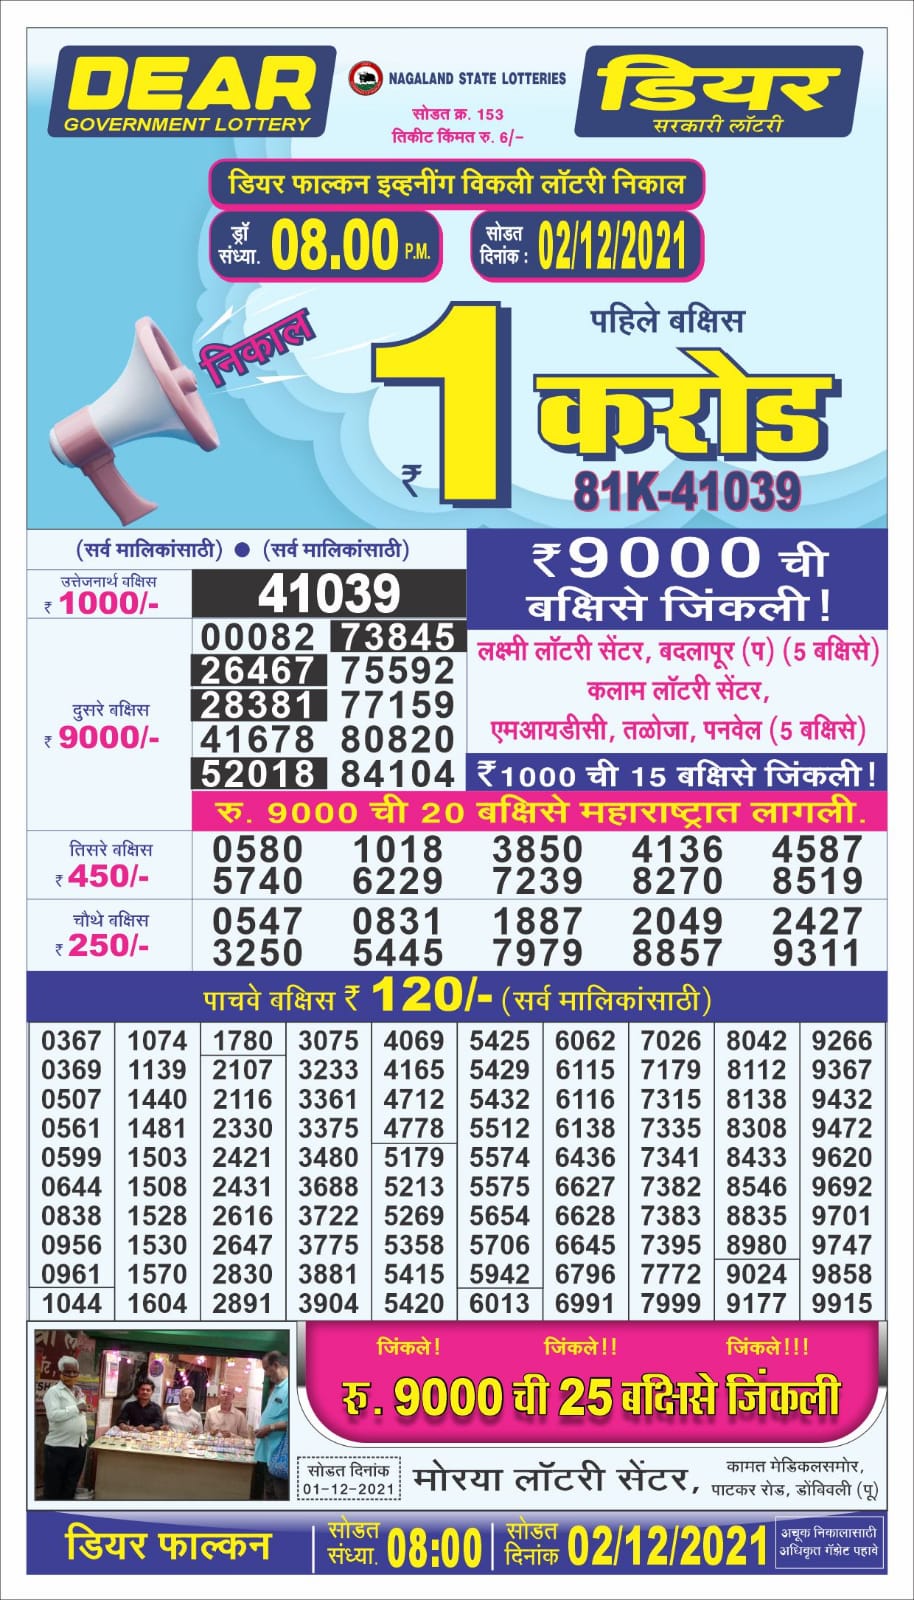 Dear Lottery Nagaland State Lottery Today 8:00 PM 02-12-2021